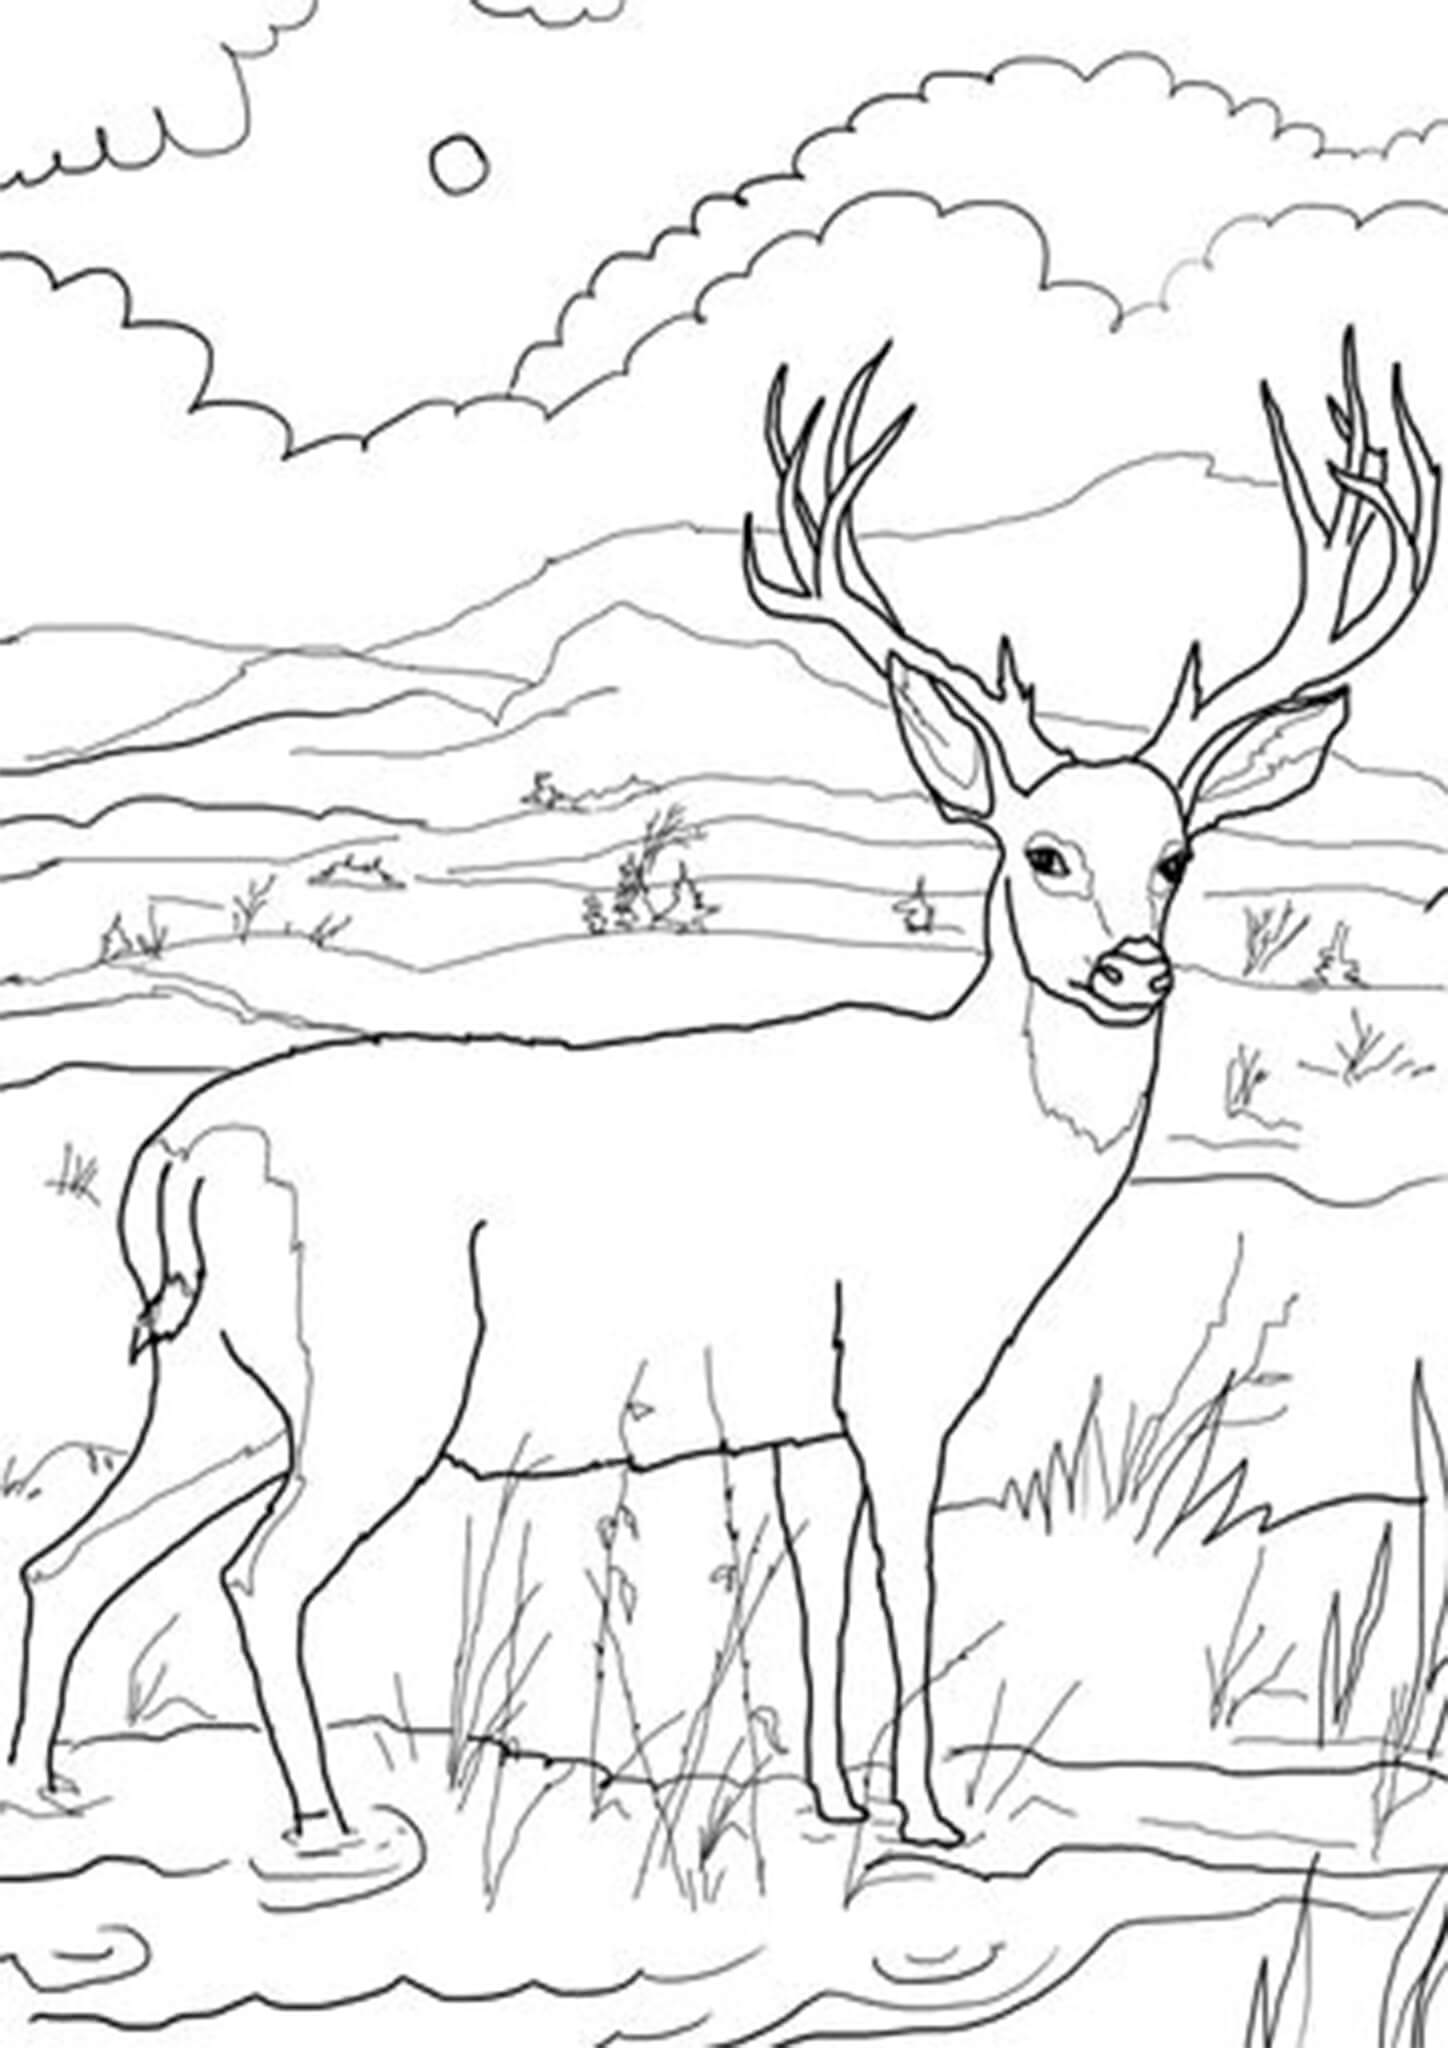 Free & Easy To Print Deer Coloring Pages - Tulamama